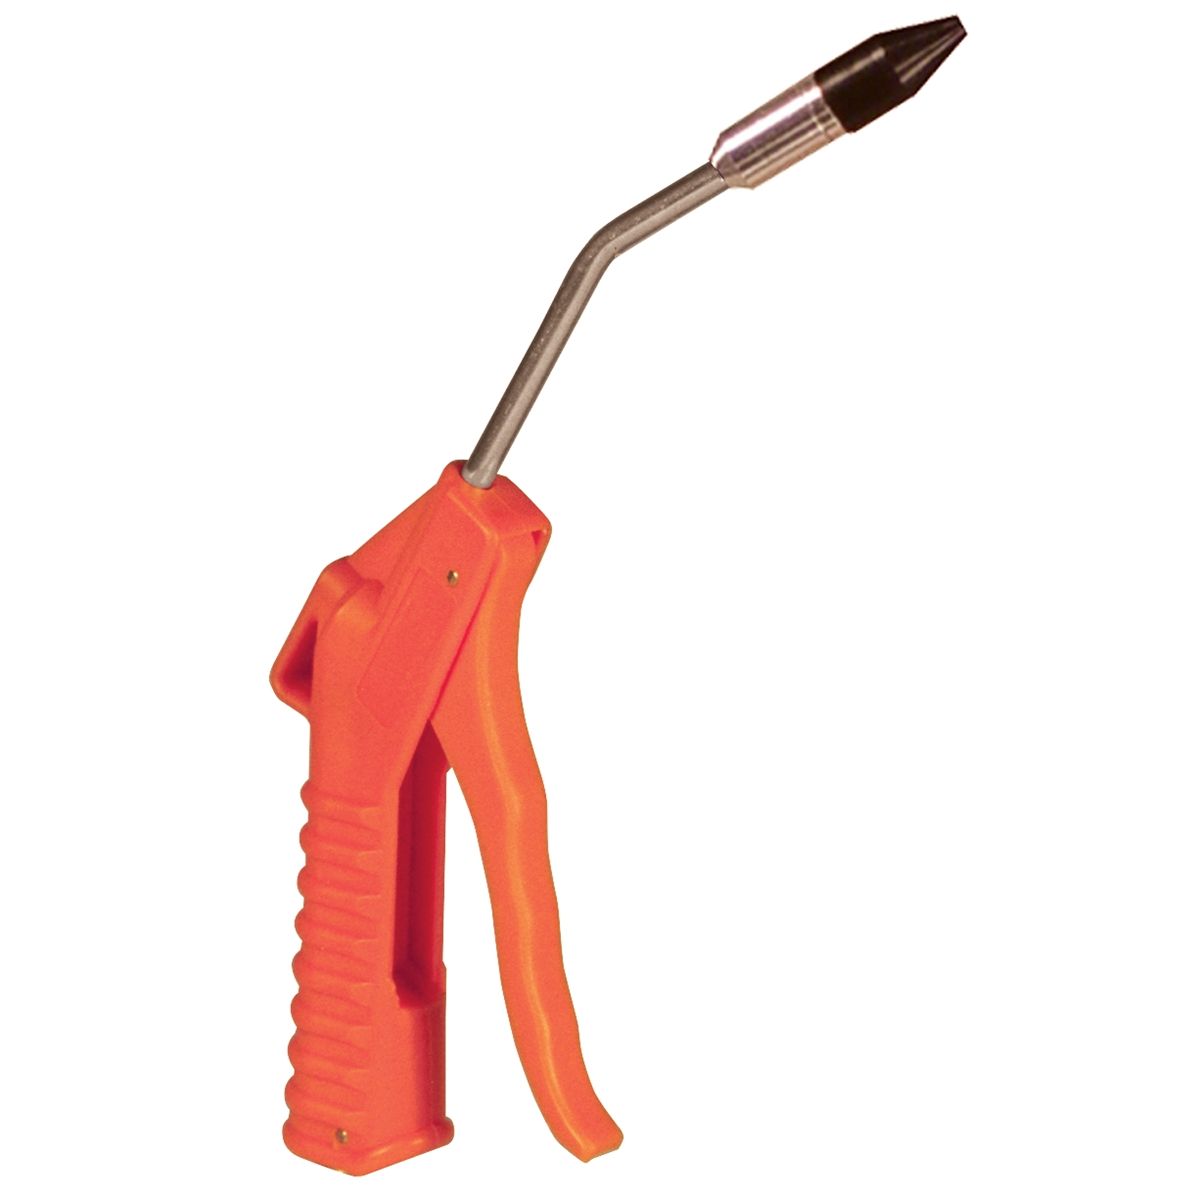 Deluxe 4 In Air Blow Gun w/ 1/2 In Removable Rubber Tip Orange